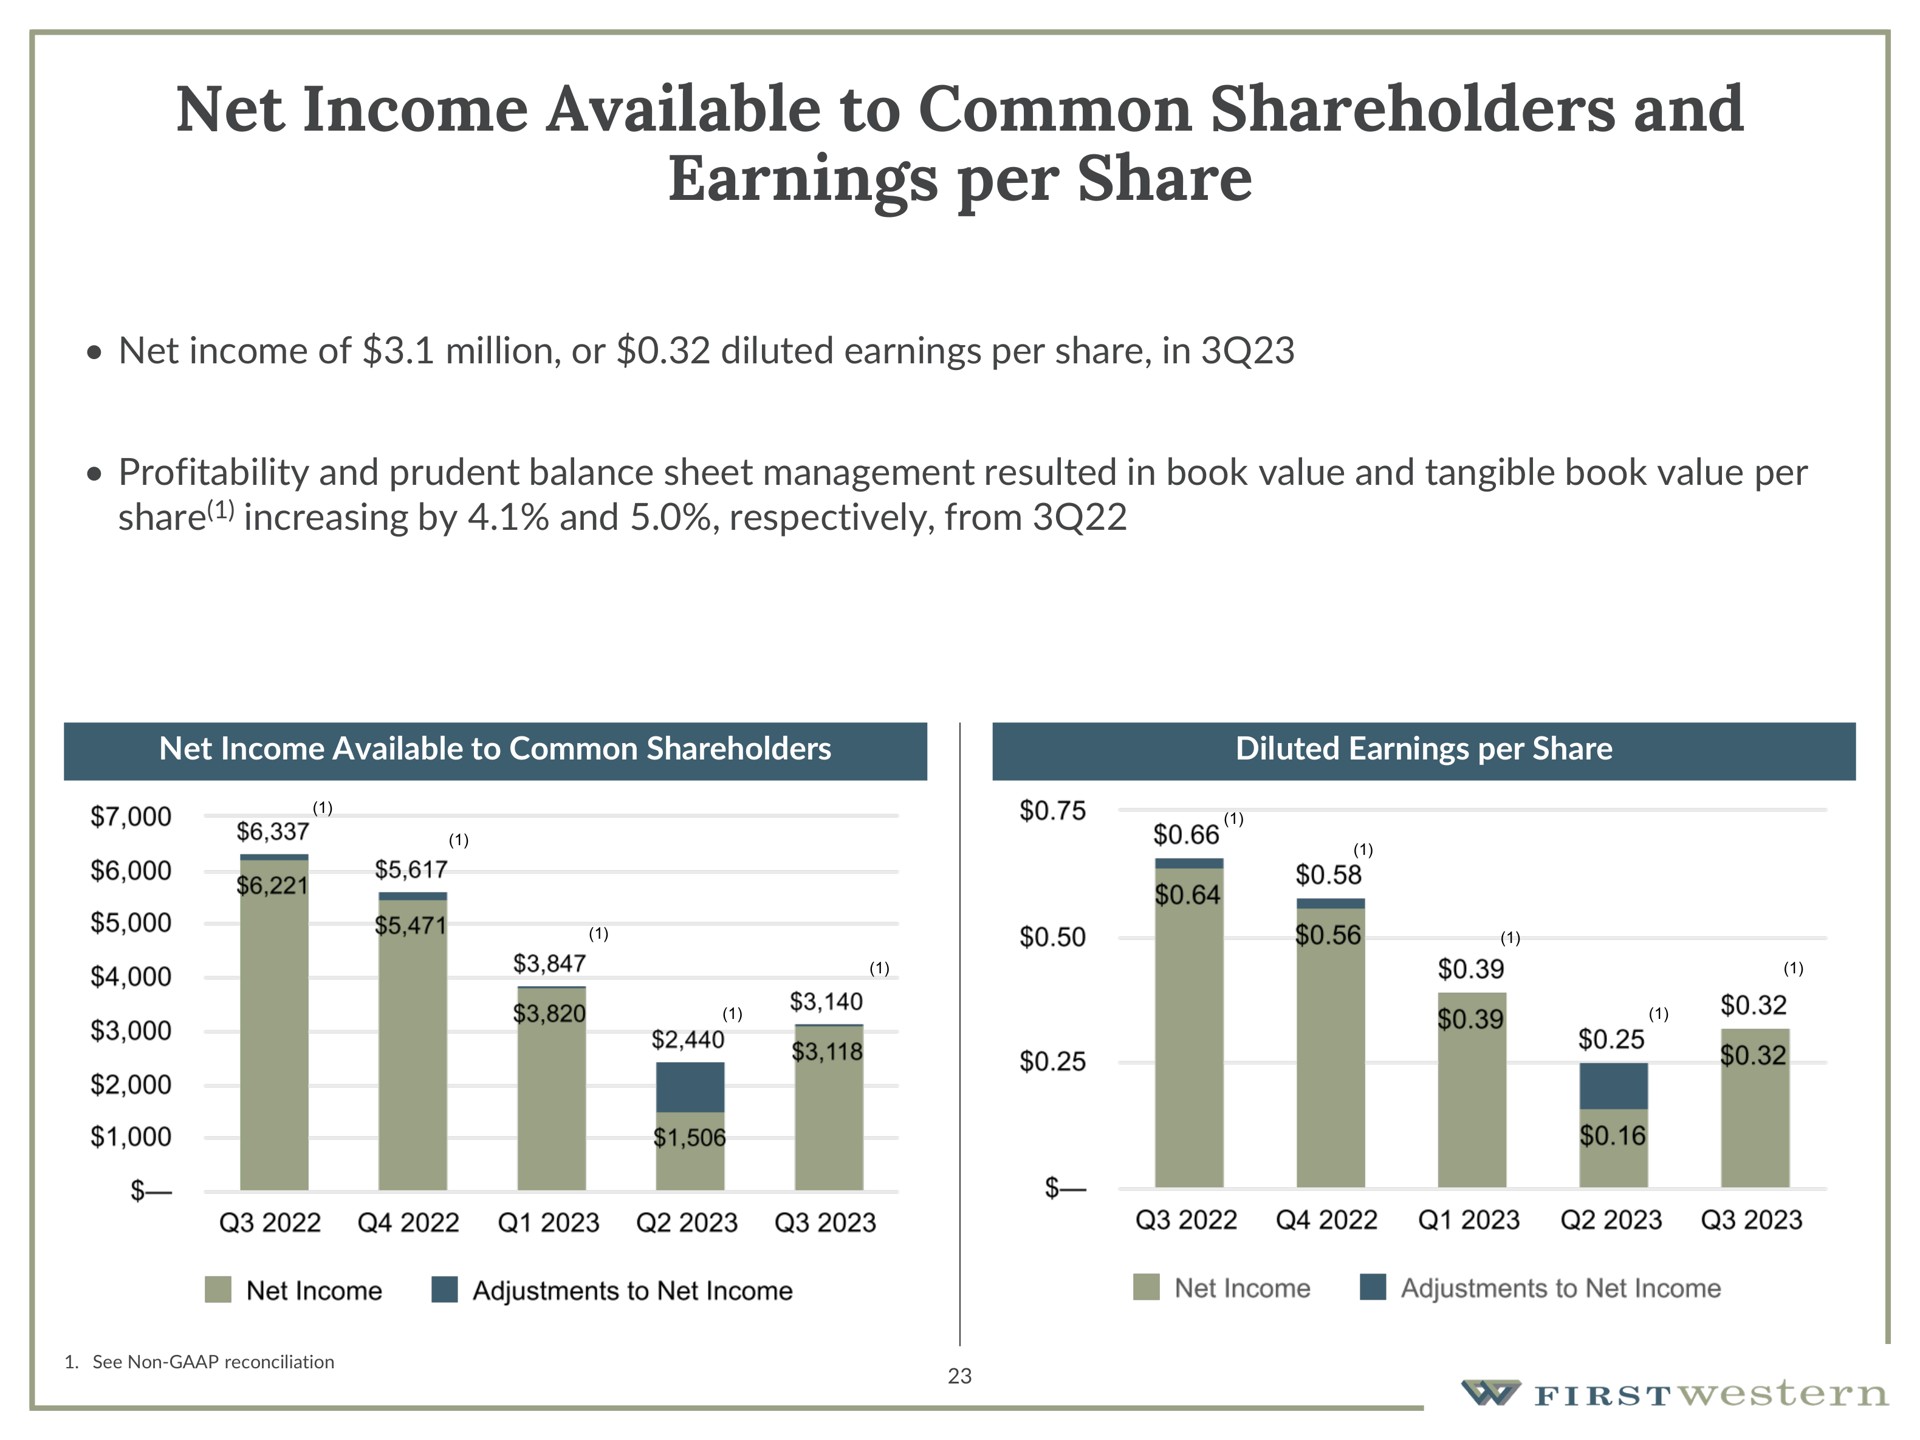 net income available to common shareholders and earnings per share | First Western Financial